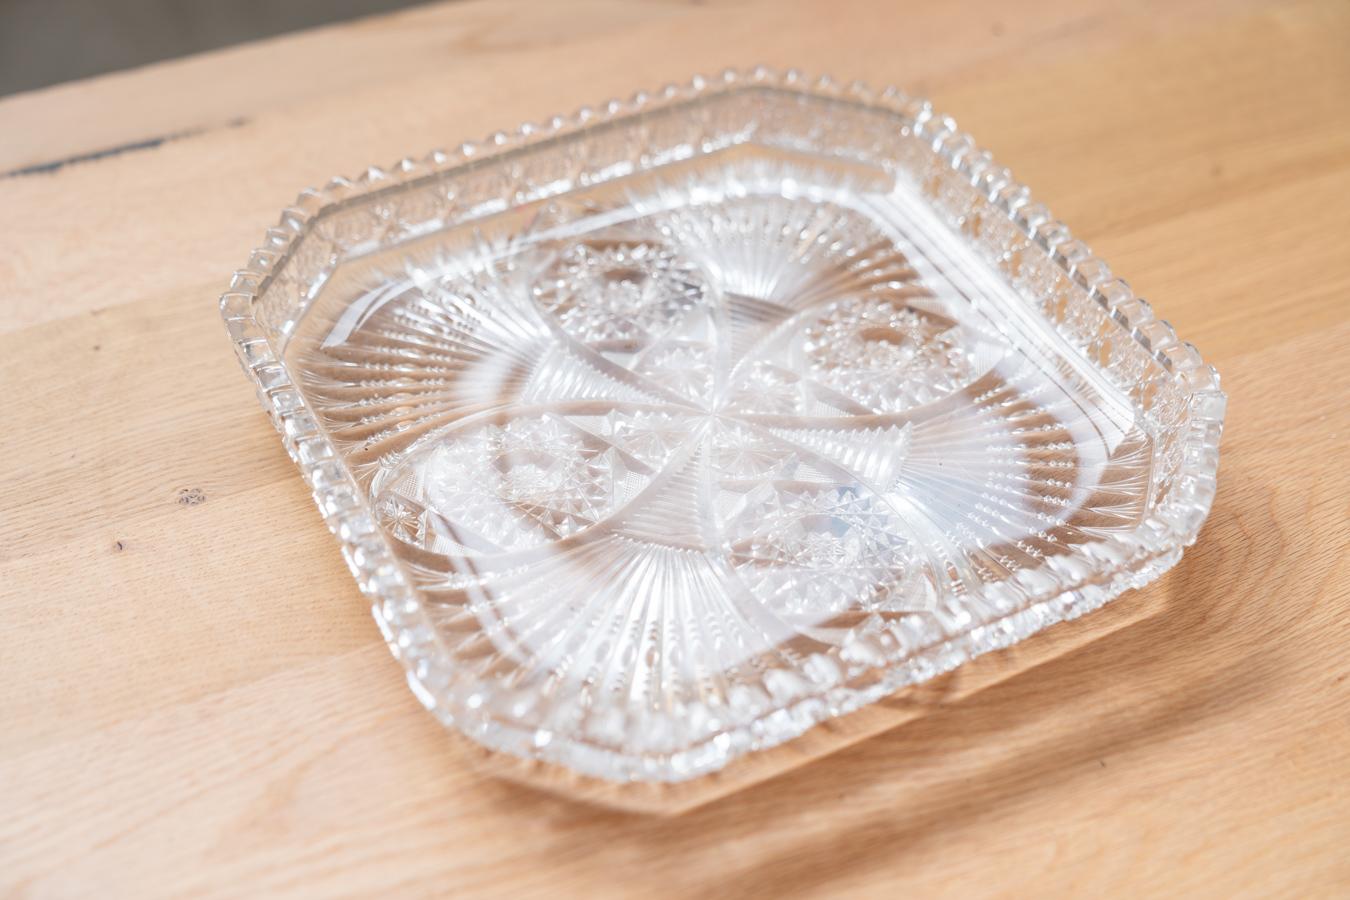 Square Bohemian crystal tray, hand-carved.     
H4.5 x W29 x D9 - Kg0.5   
Materiali
Crystal
Color
Transparent
Weight range
Lightweight - Under 40 kg
Detailed conditions
Very Good - This vintage/antique item has no defects, but may show slight